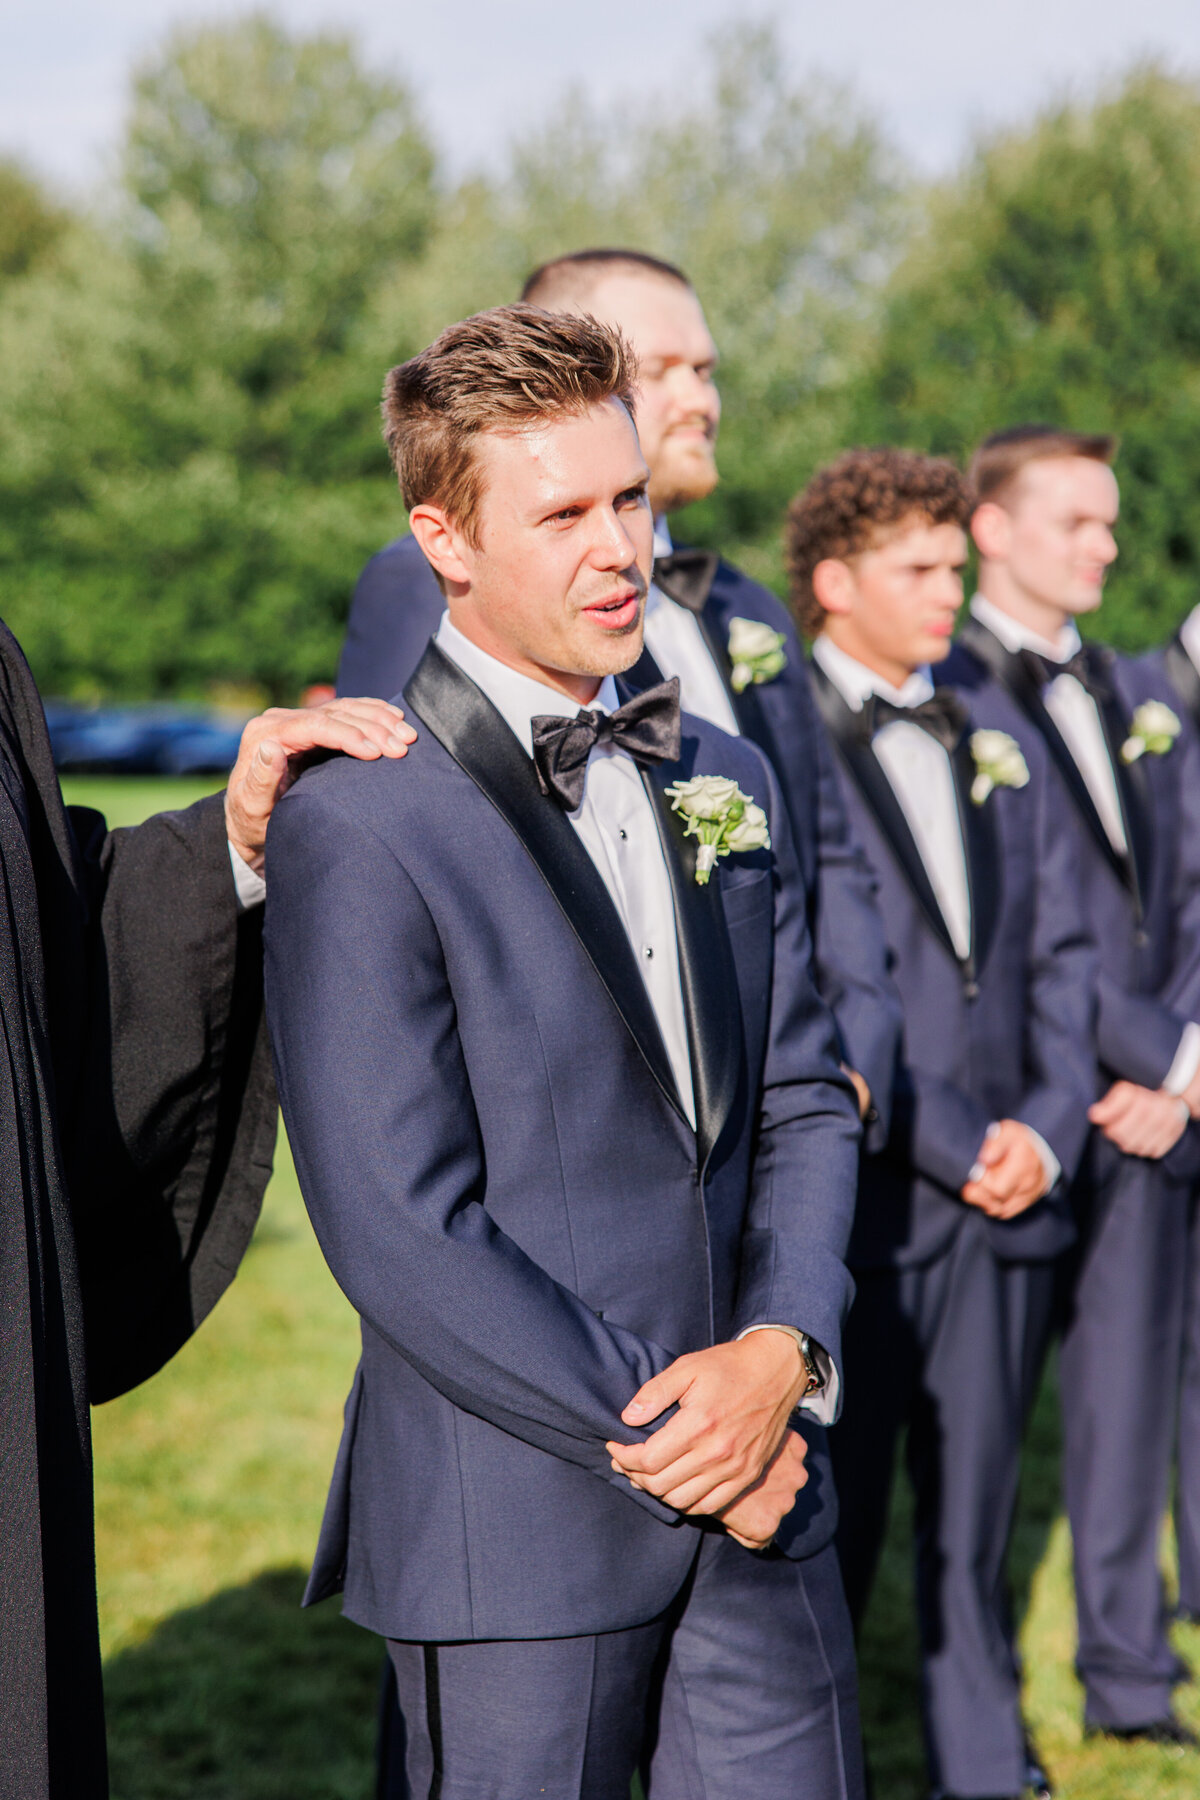 Groom looking emotional and excited as bride walks down the aisle representing joyful Boston wedding photography